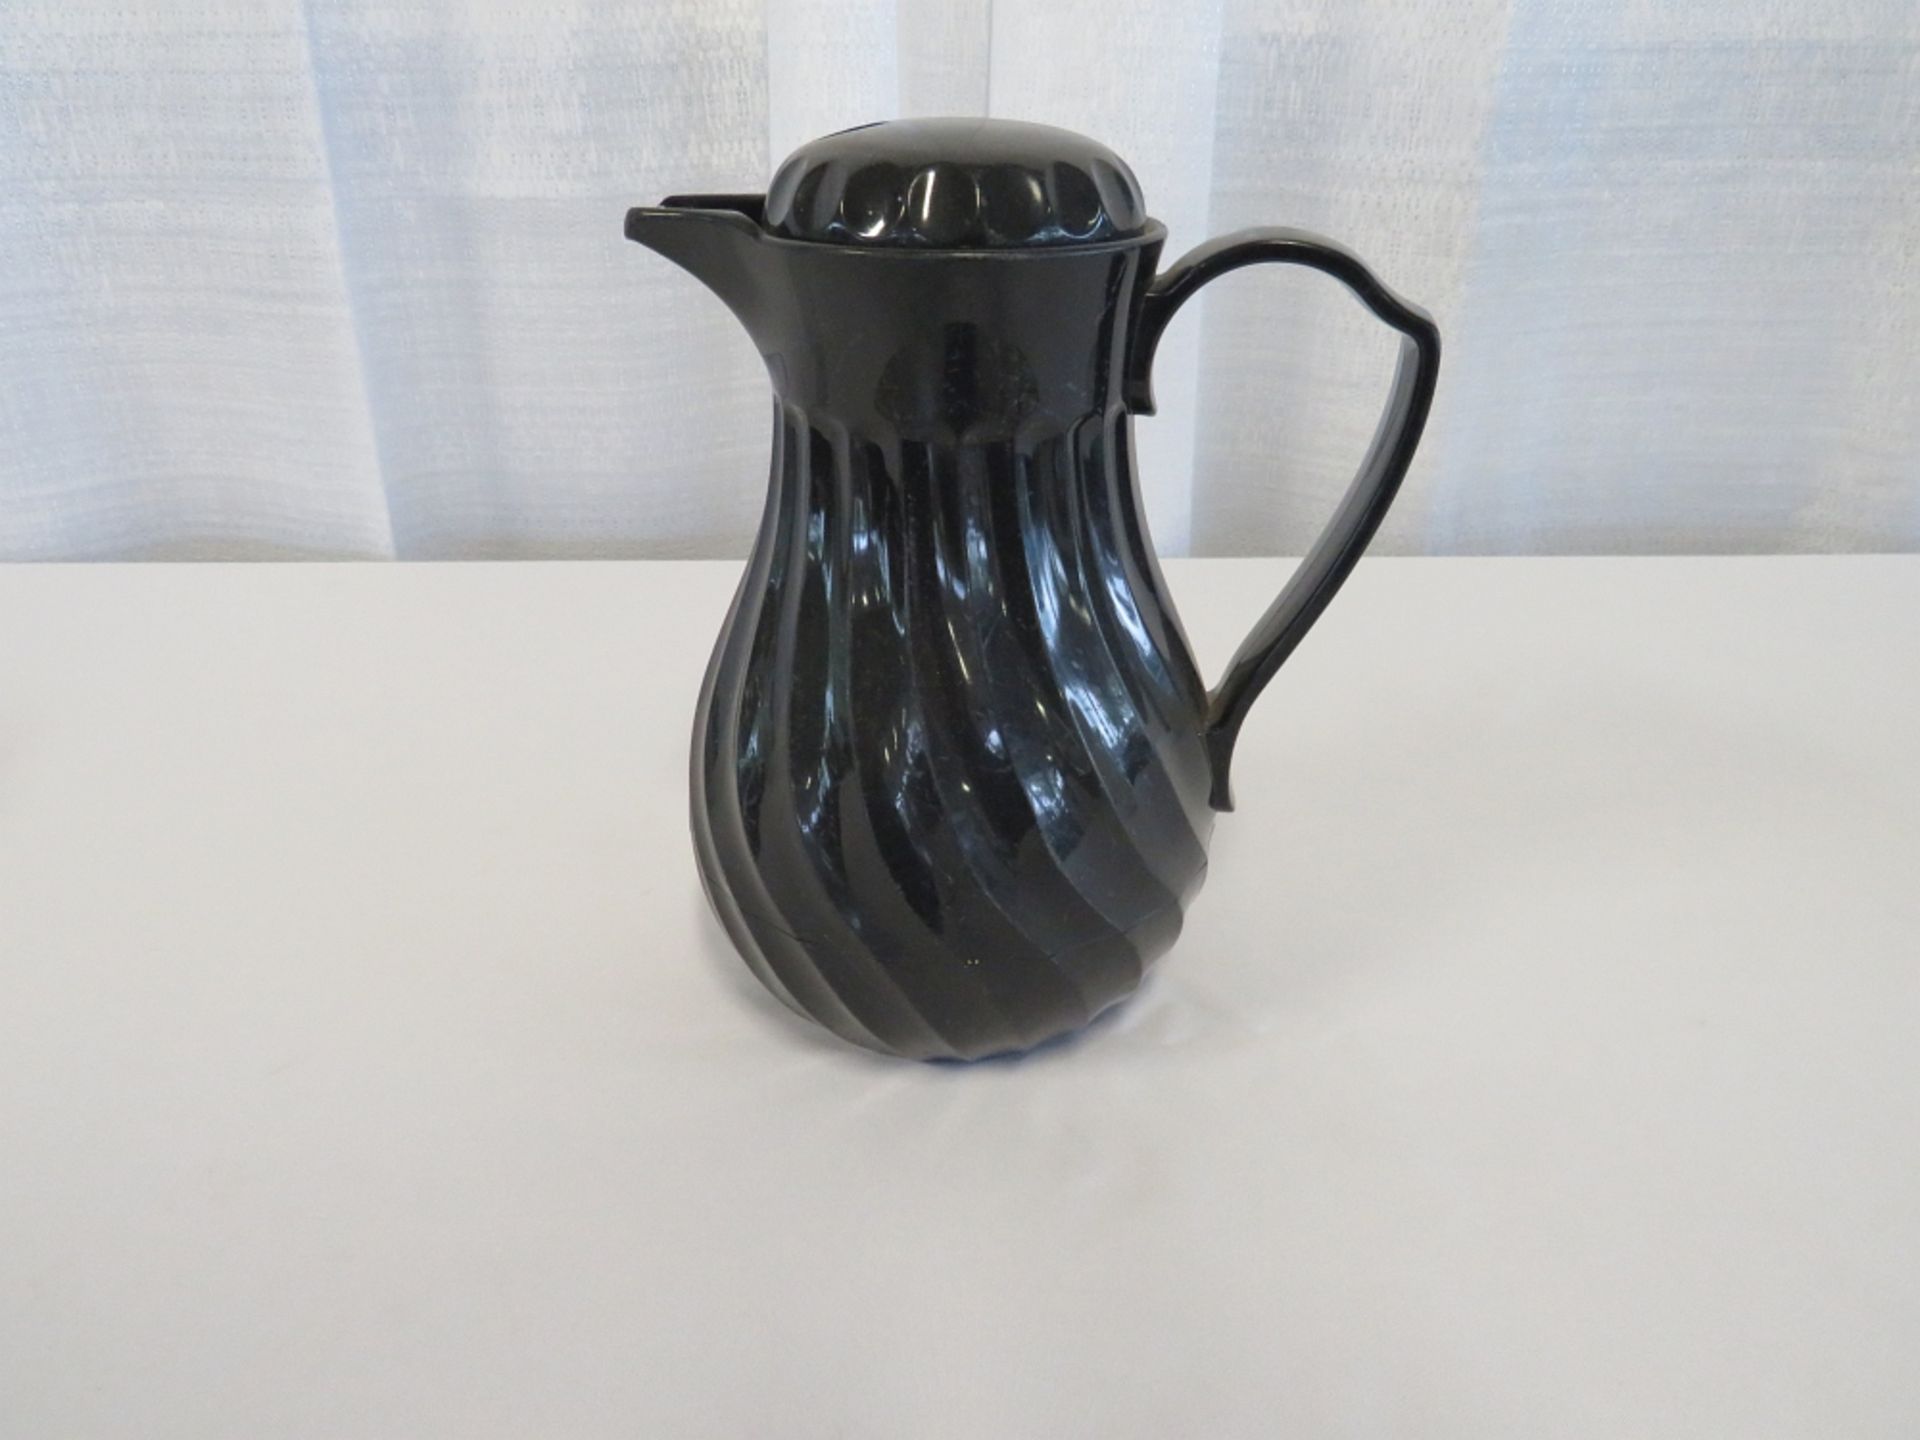 Black Insulated Pitcher